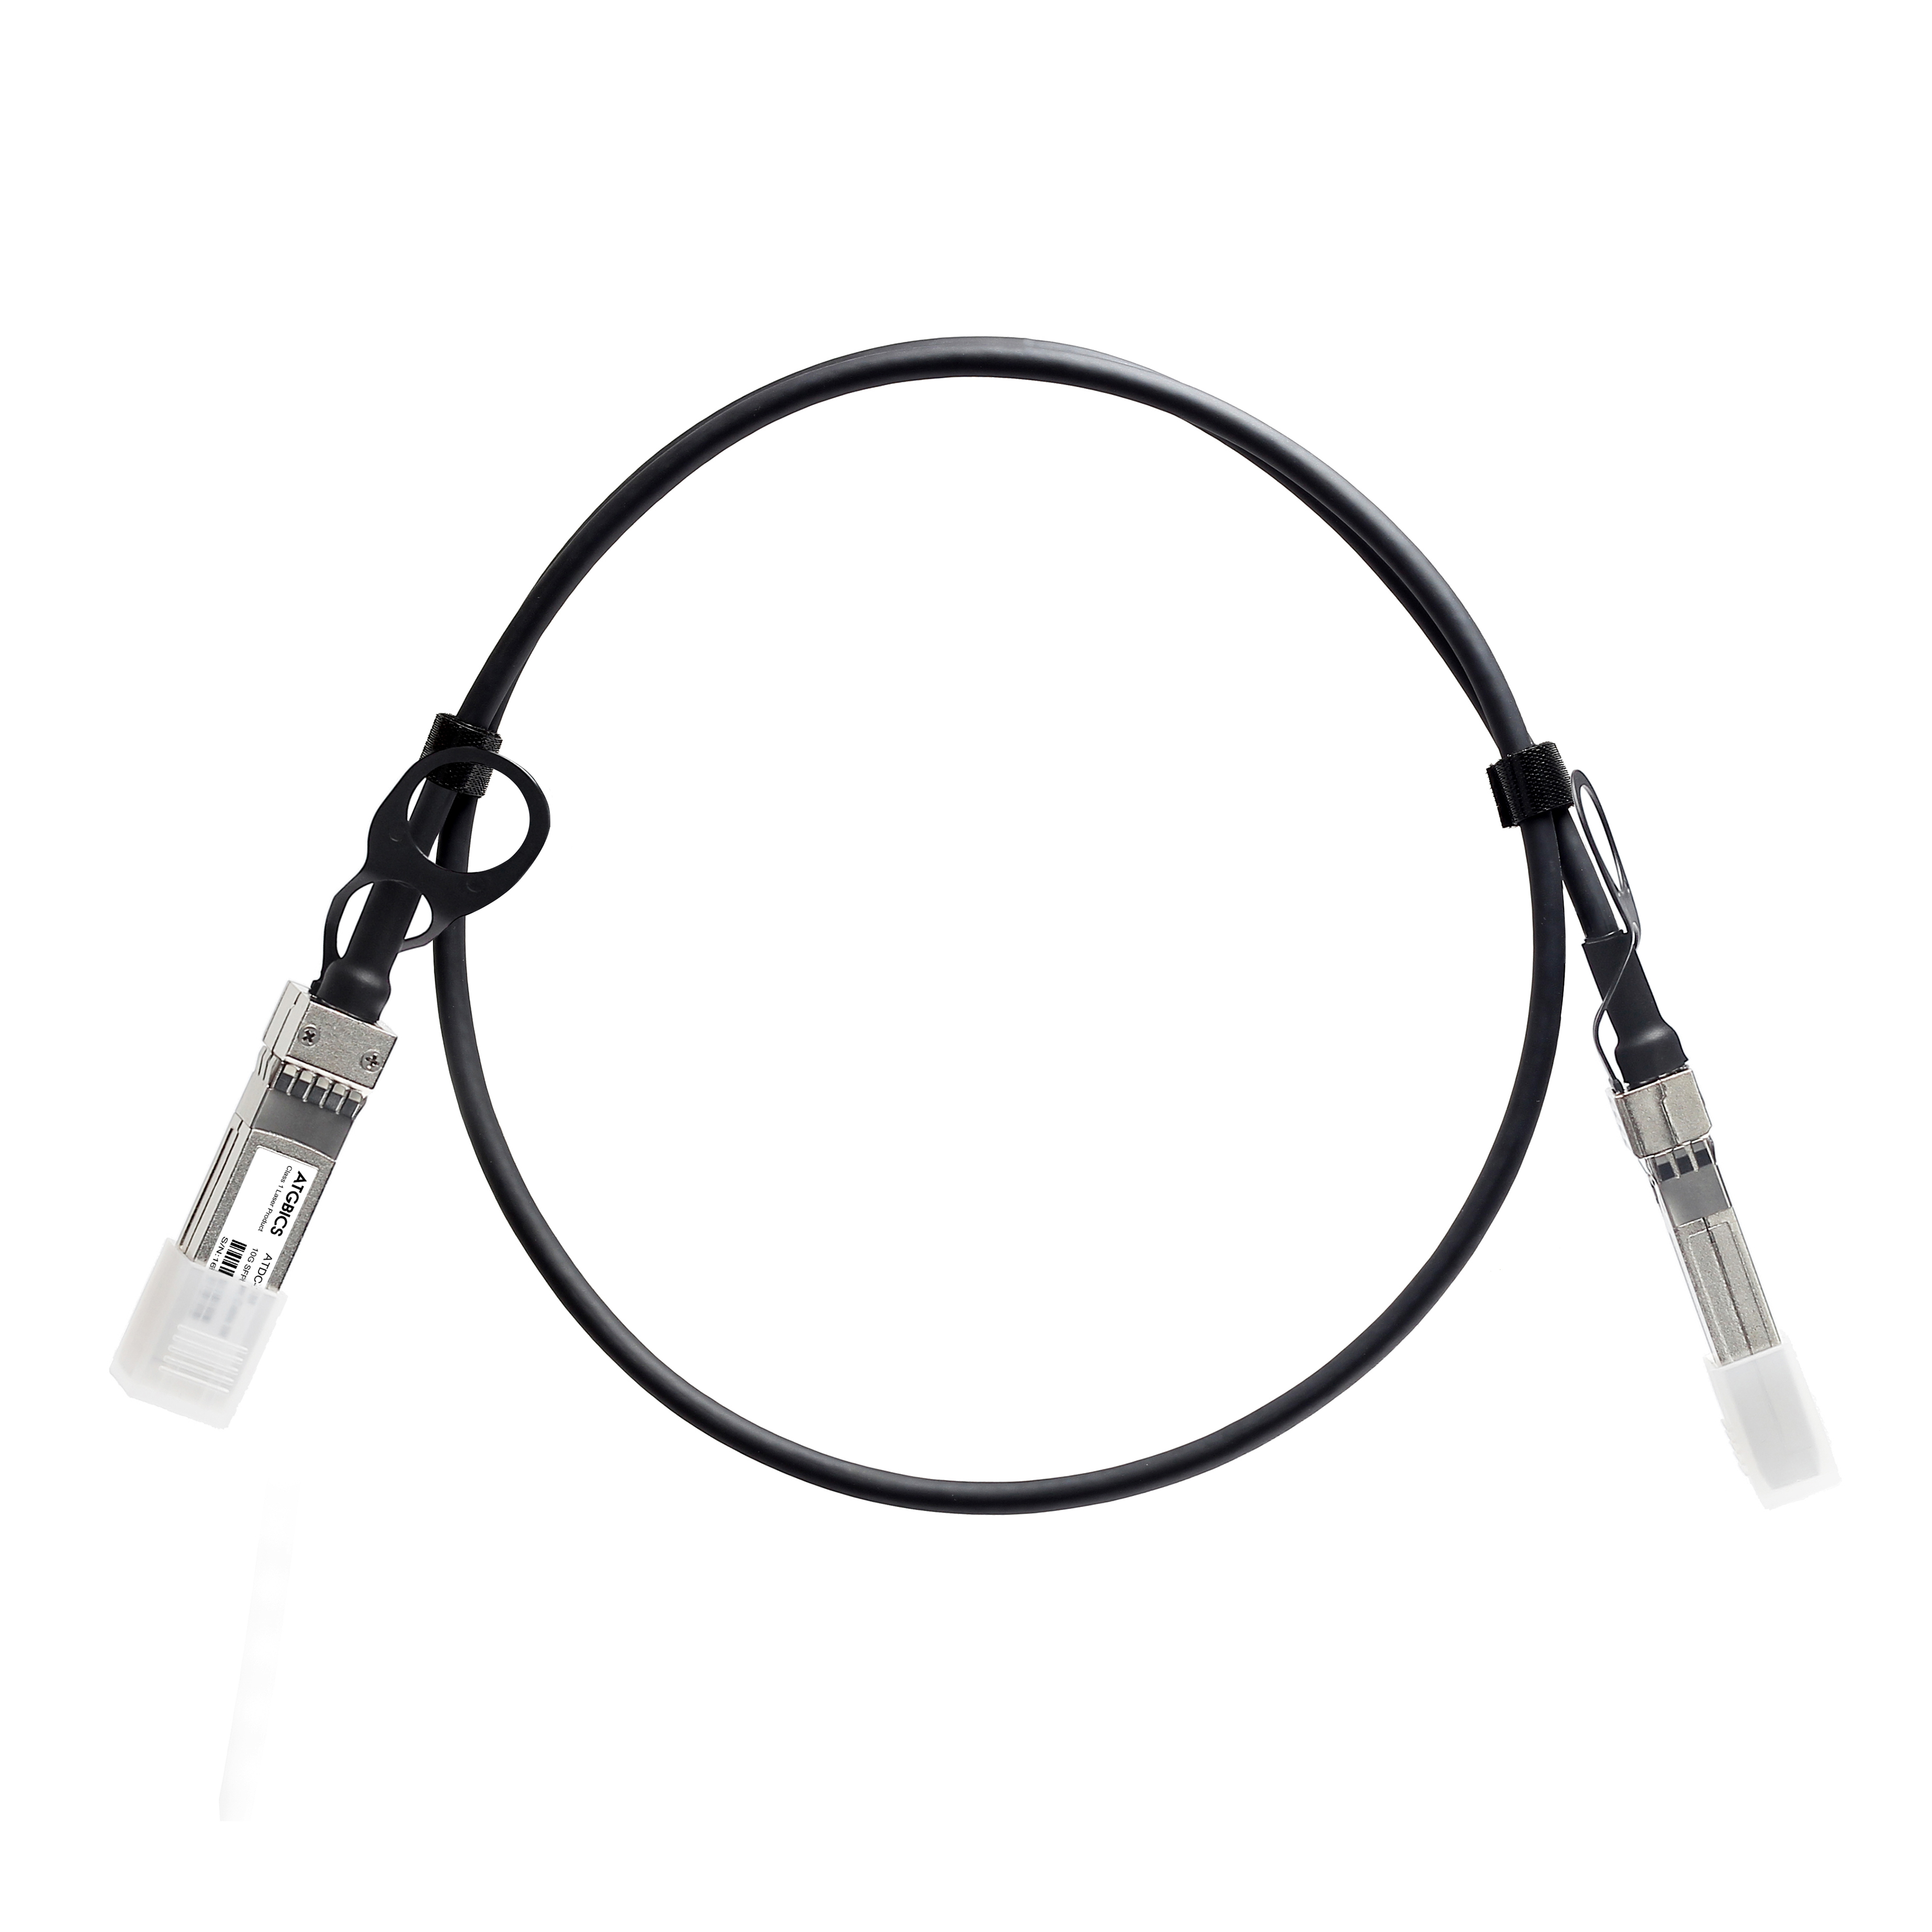 the part number is SFP-10GE-DAC-0.5M-C